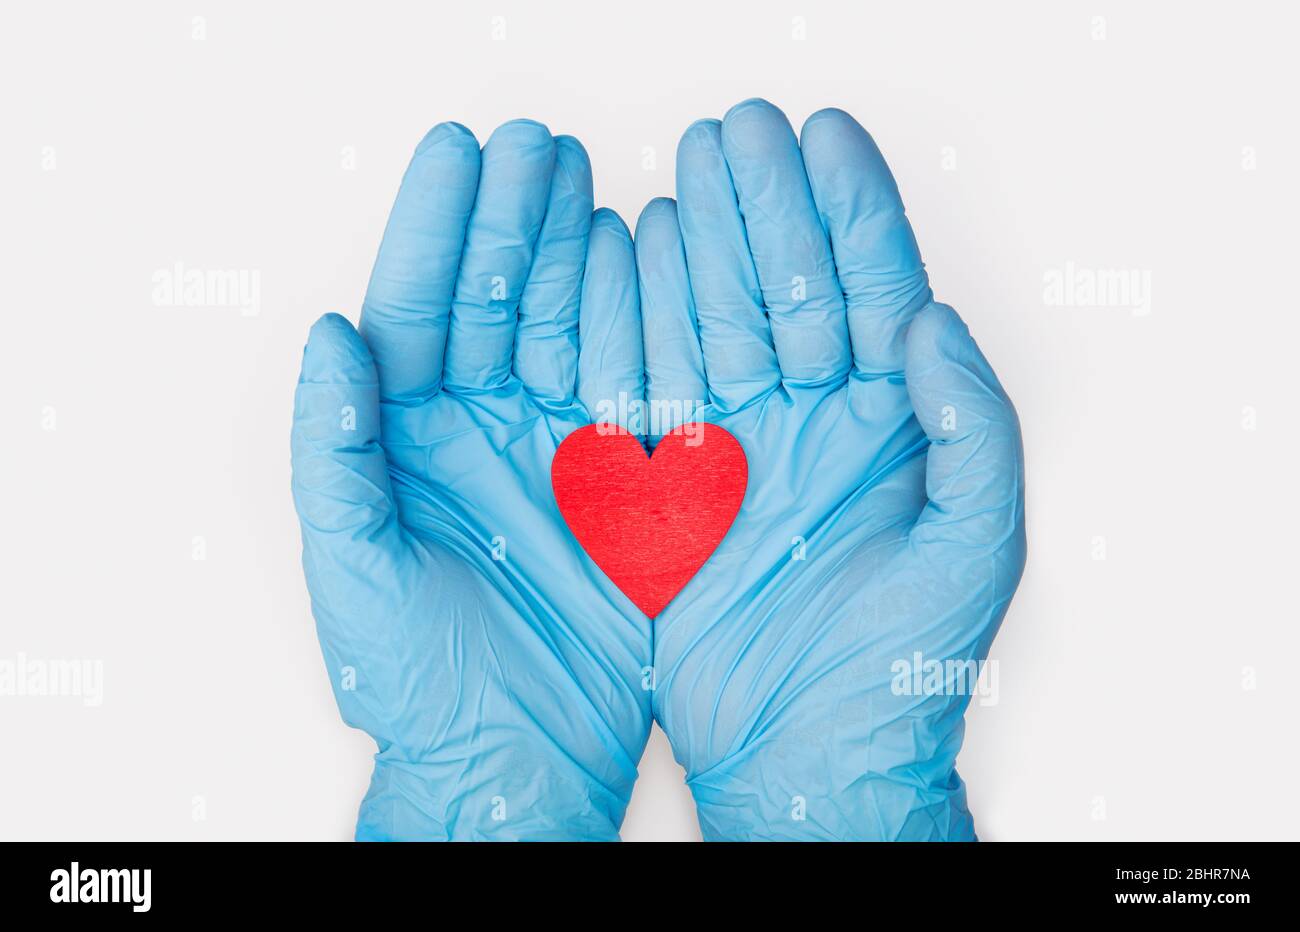 Hands in medical gloves holding a red heart shape model on white background. Cardiology. organ donation or Healthy heart concept Stock Photo